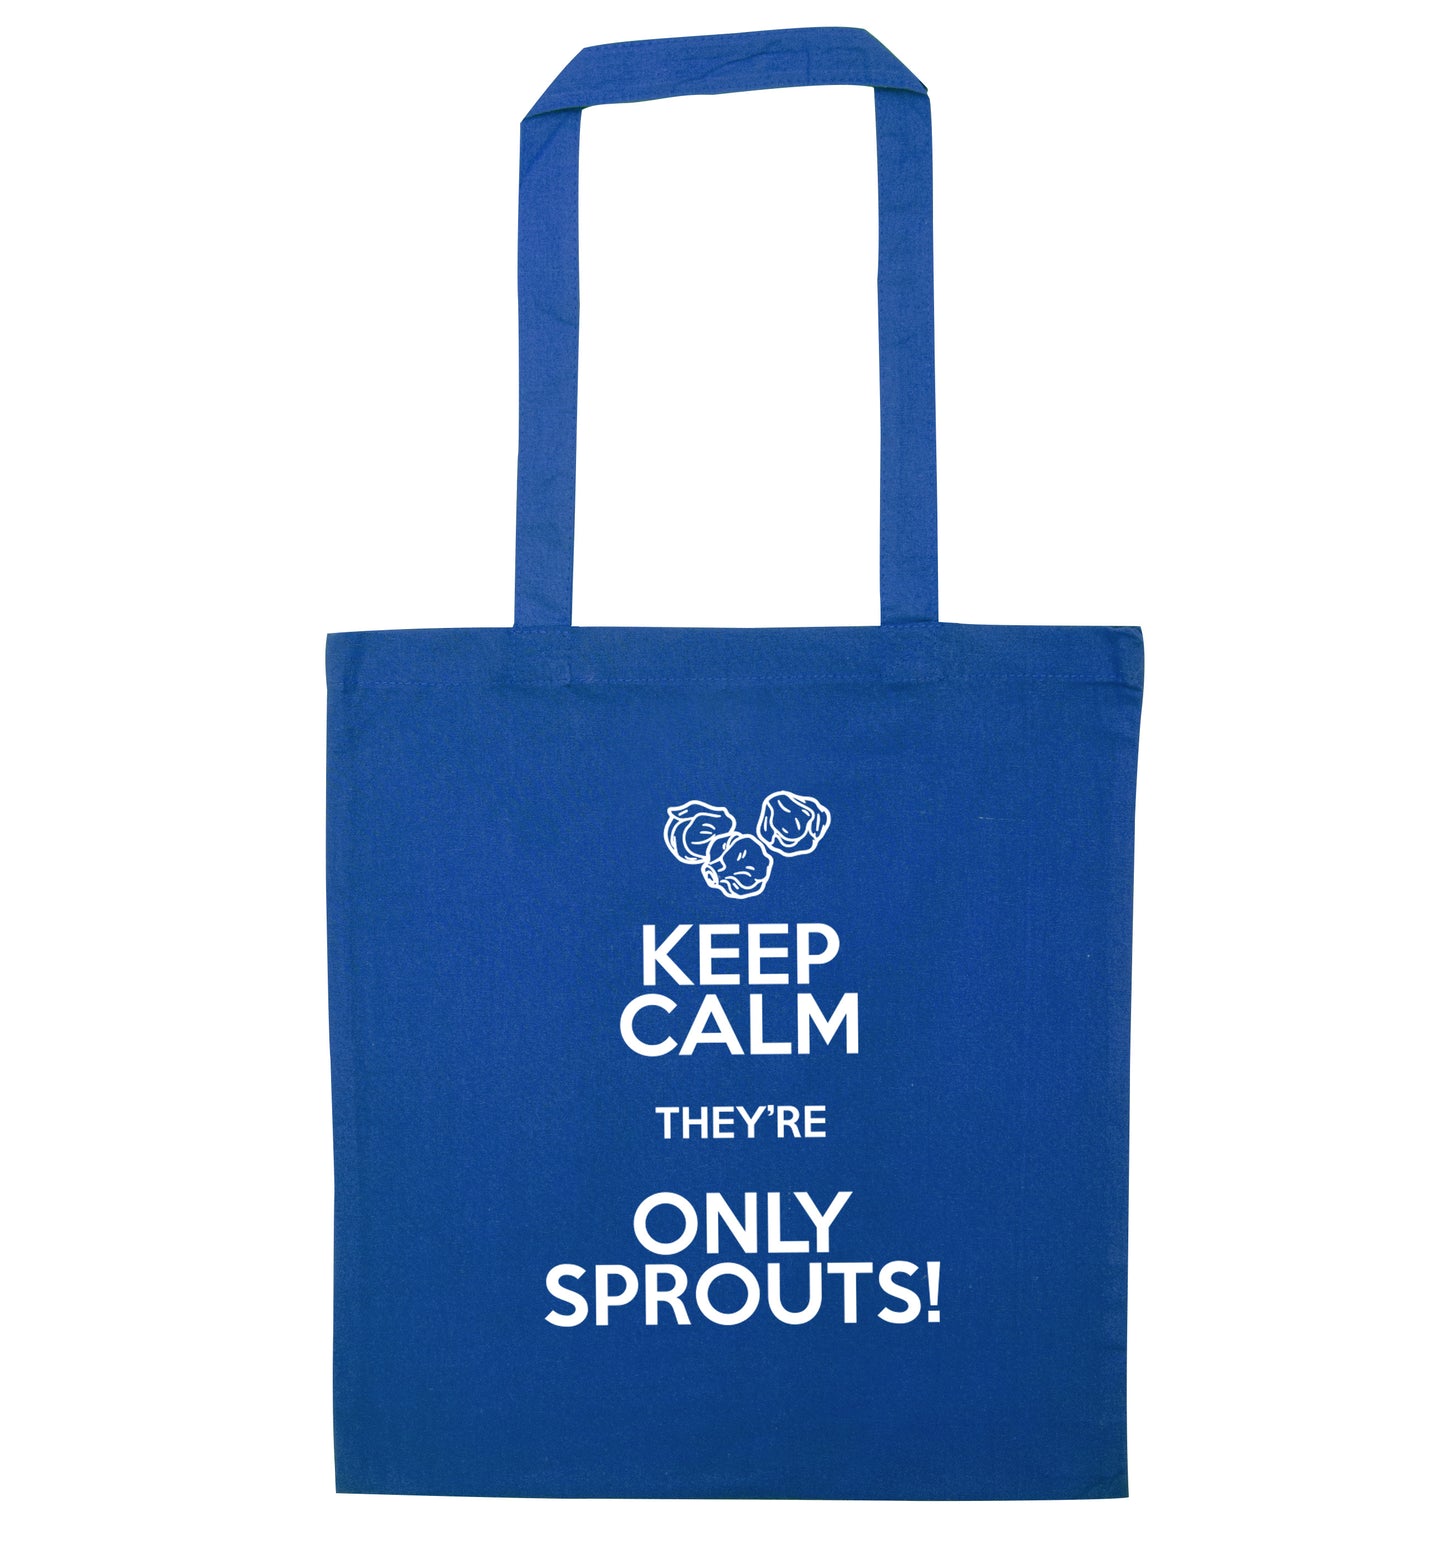 Keep calm they're only sprouts blue tote bag